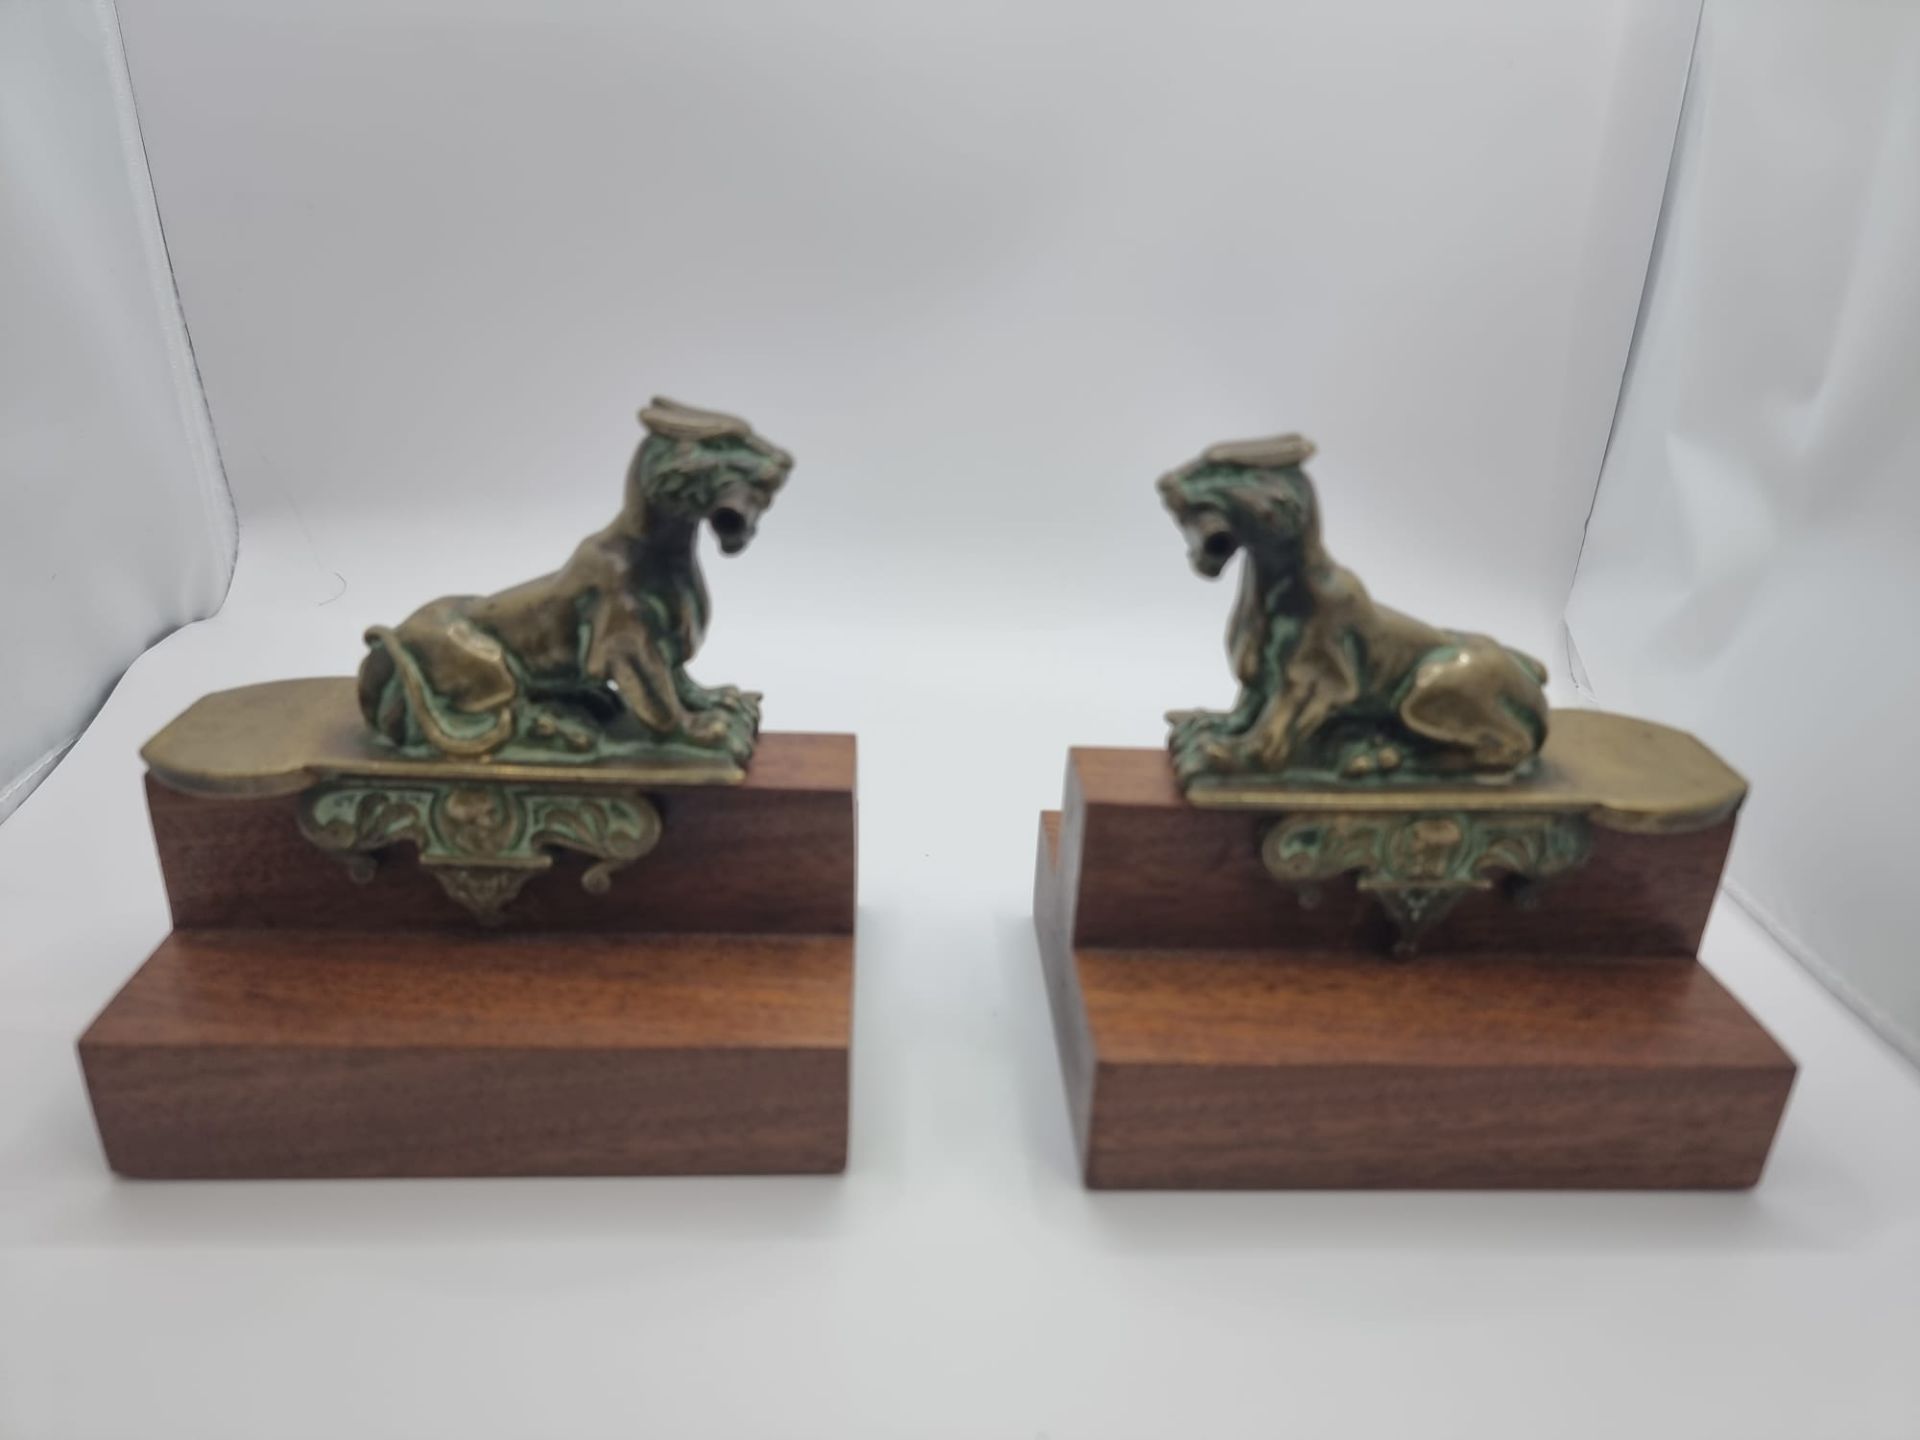 Pair Of 19th Century Decorative Bronze Lions later added to wooden plinth thus converted as Bookends - Image 10 of 10